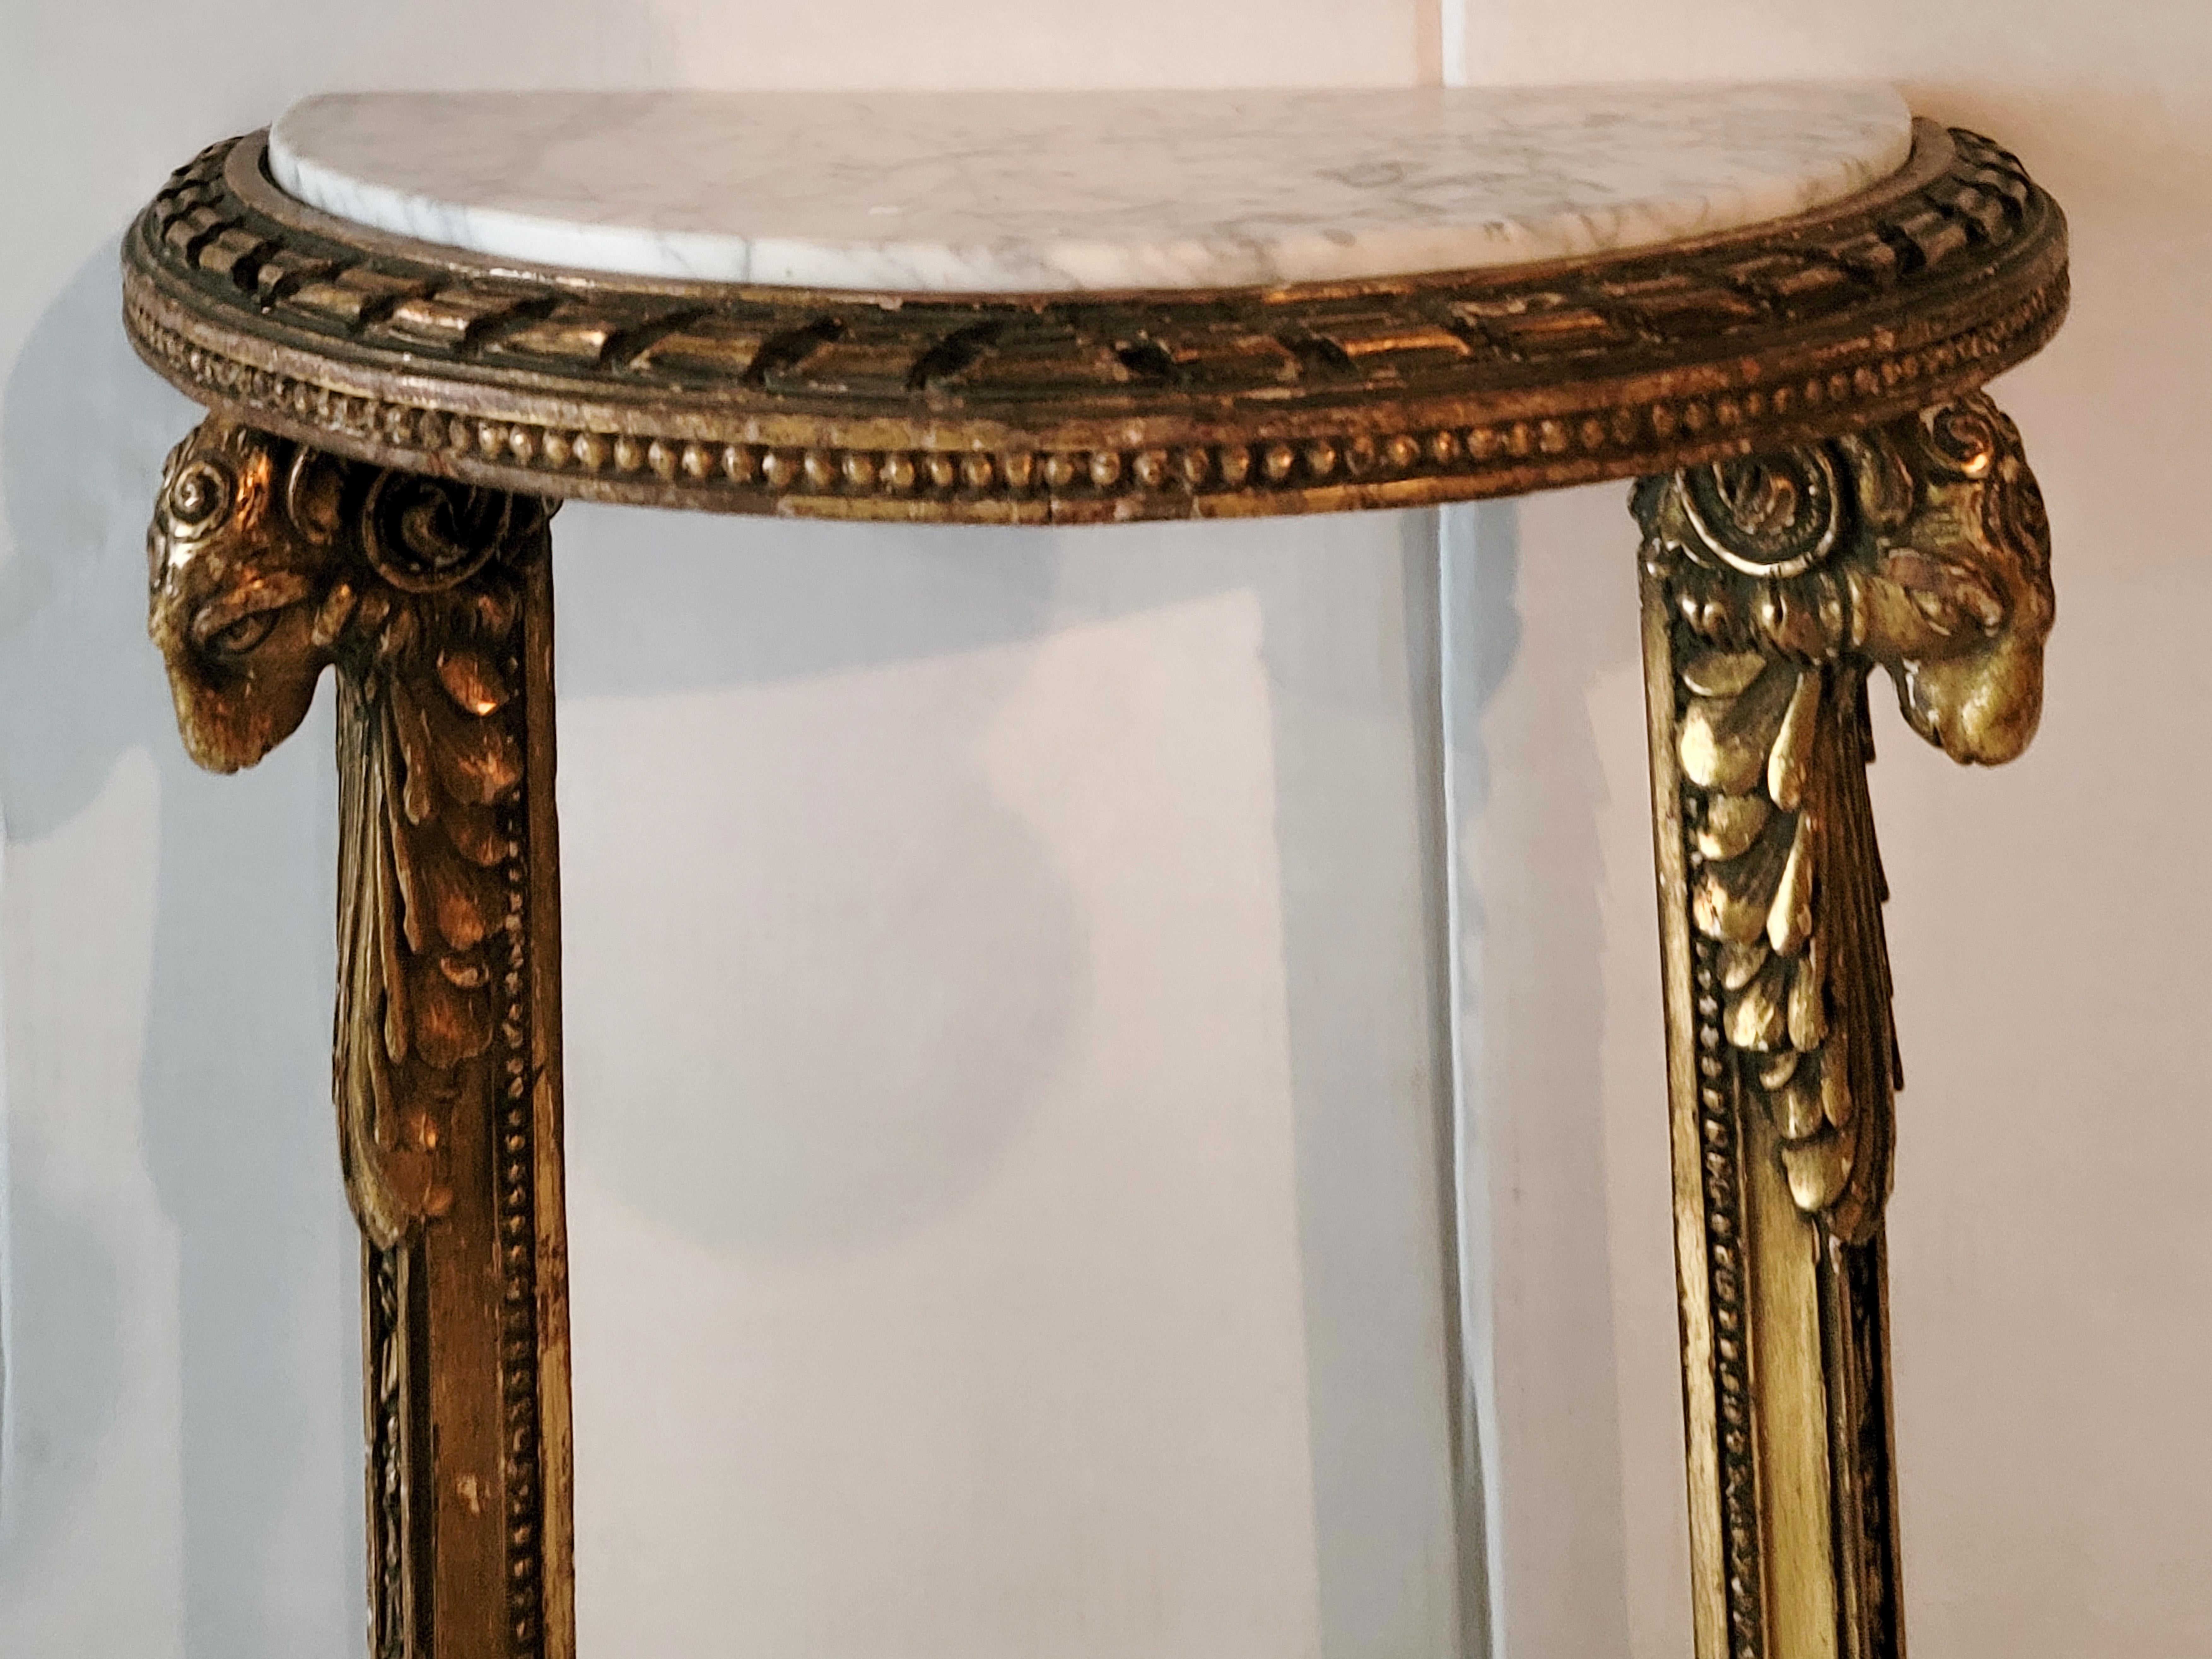 Neoclassical 19th-C. French Neo-Classical Style Carved Ram Marble Top Console Tables, Pair